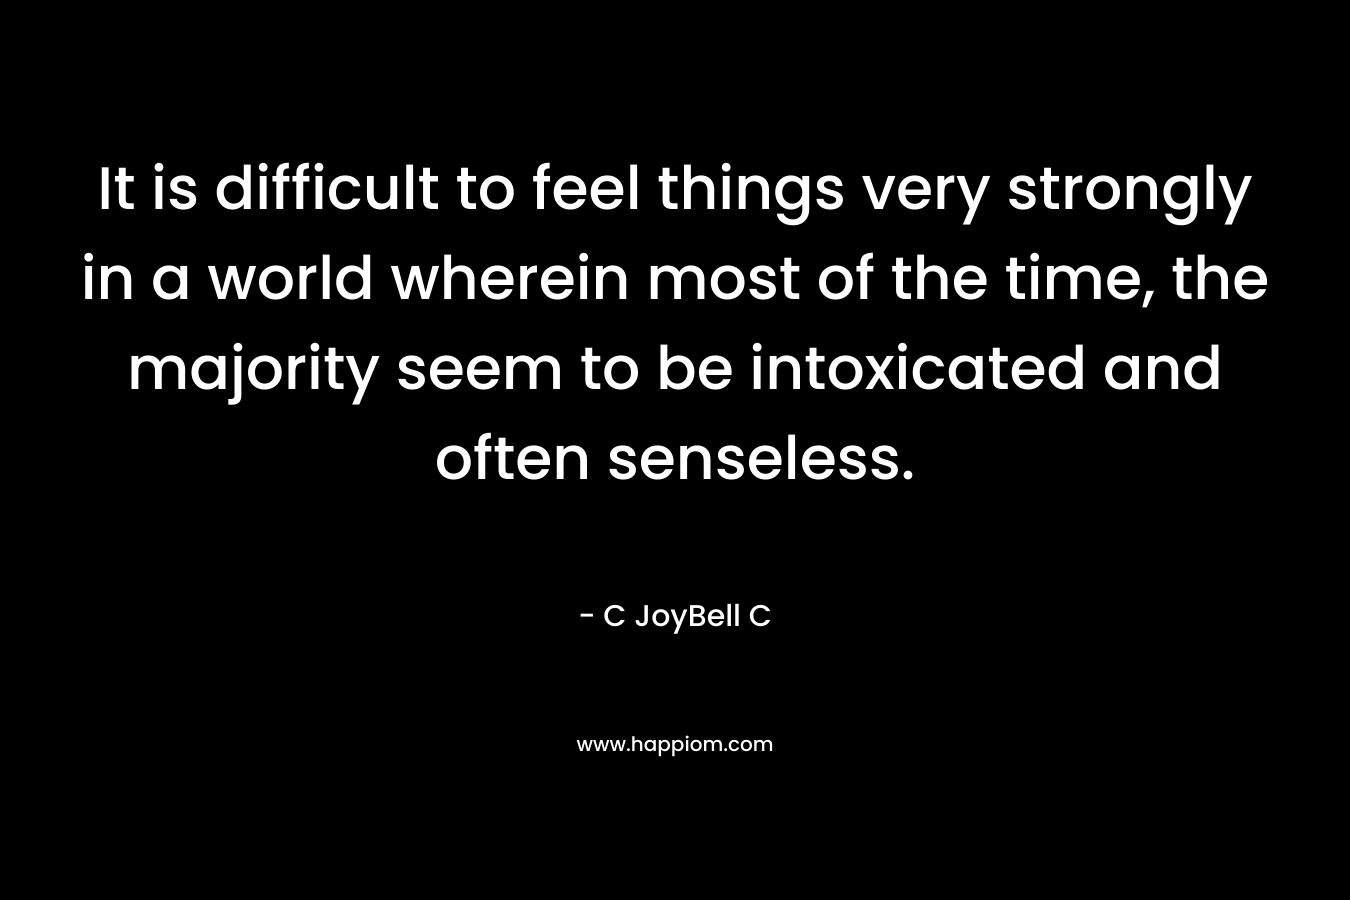 It is difficult to feel things very strongly in a world wherein most of the time, the majority seem to be intoxicated and often senseless.